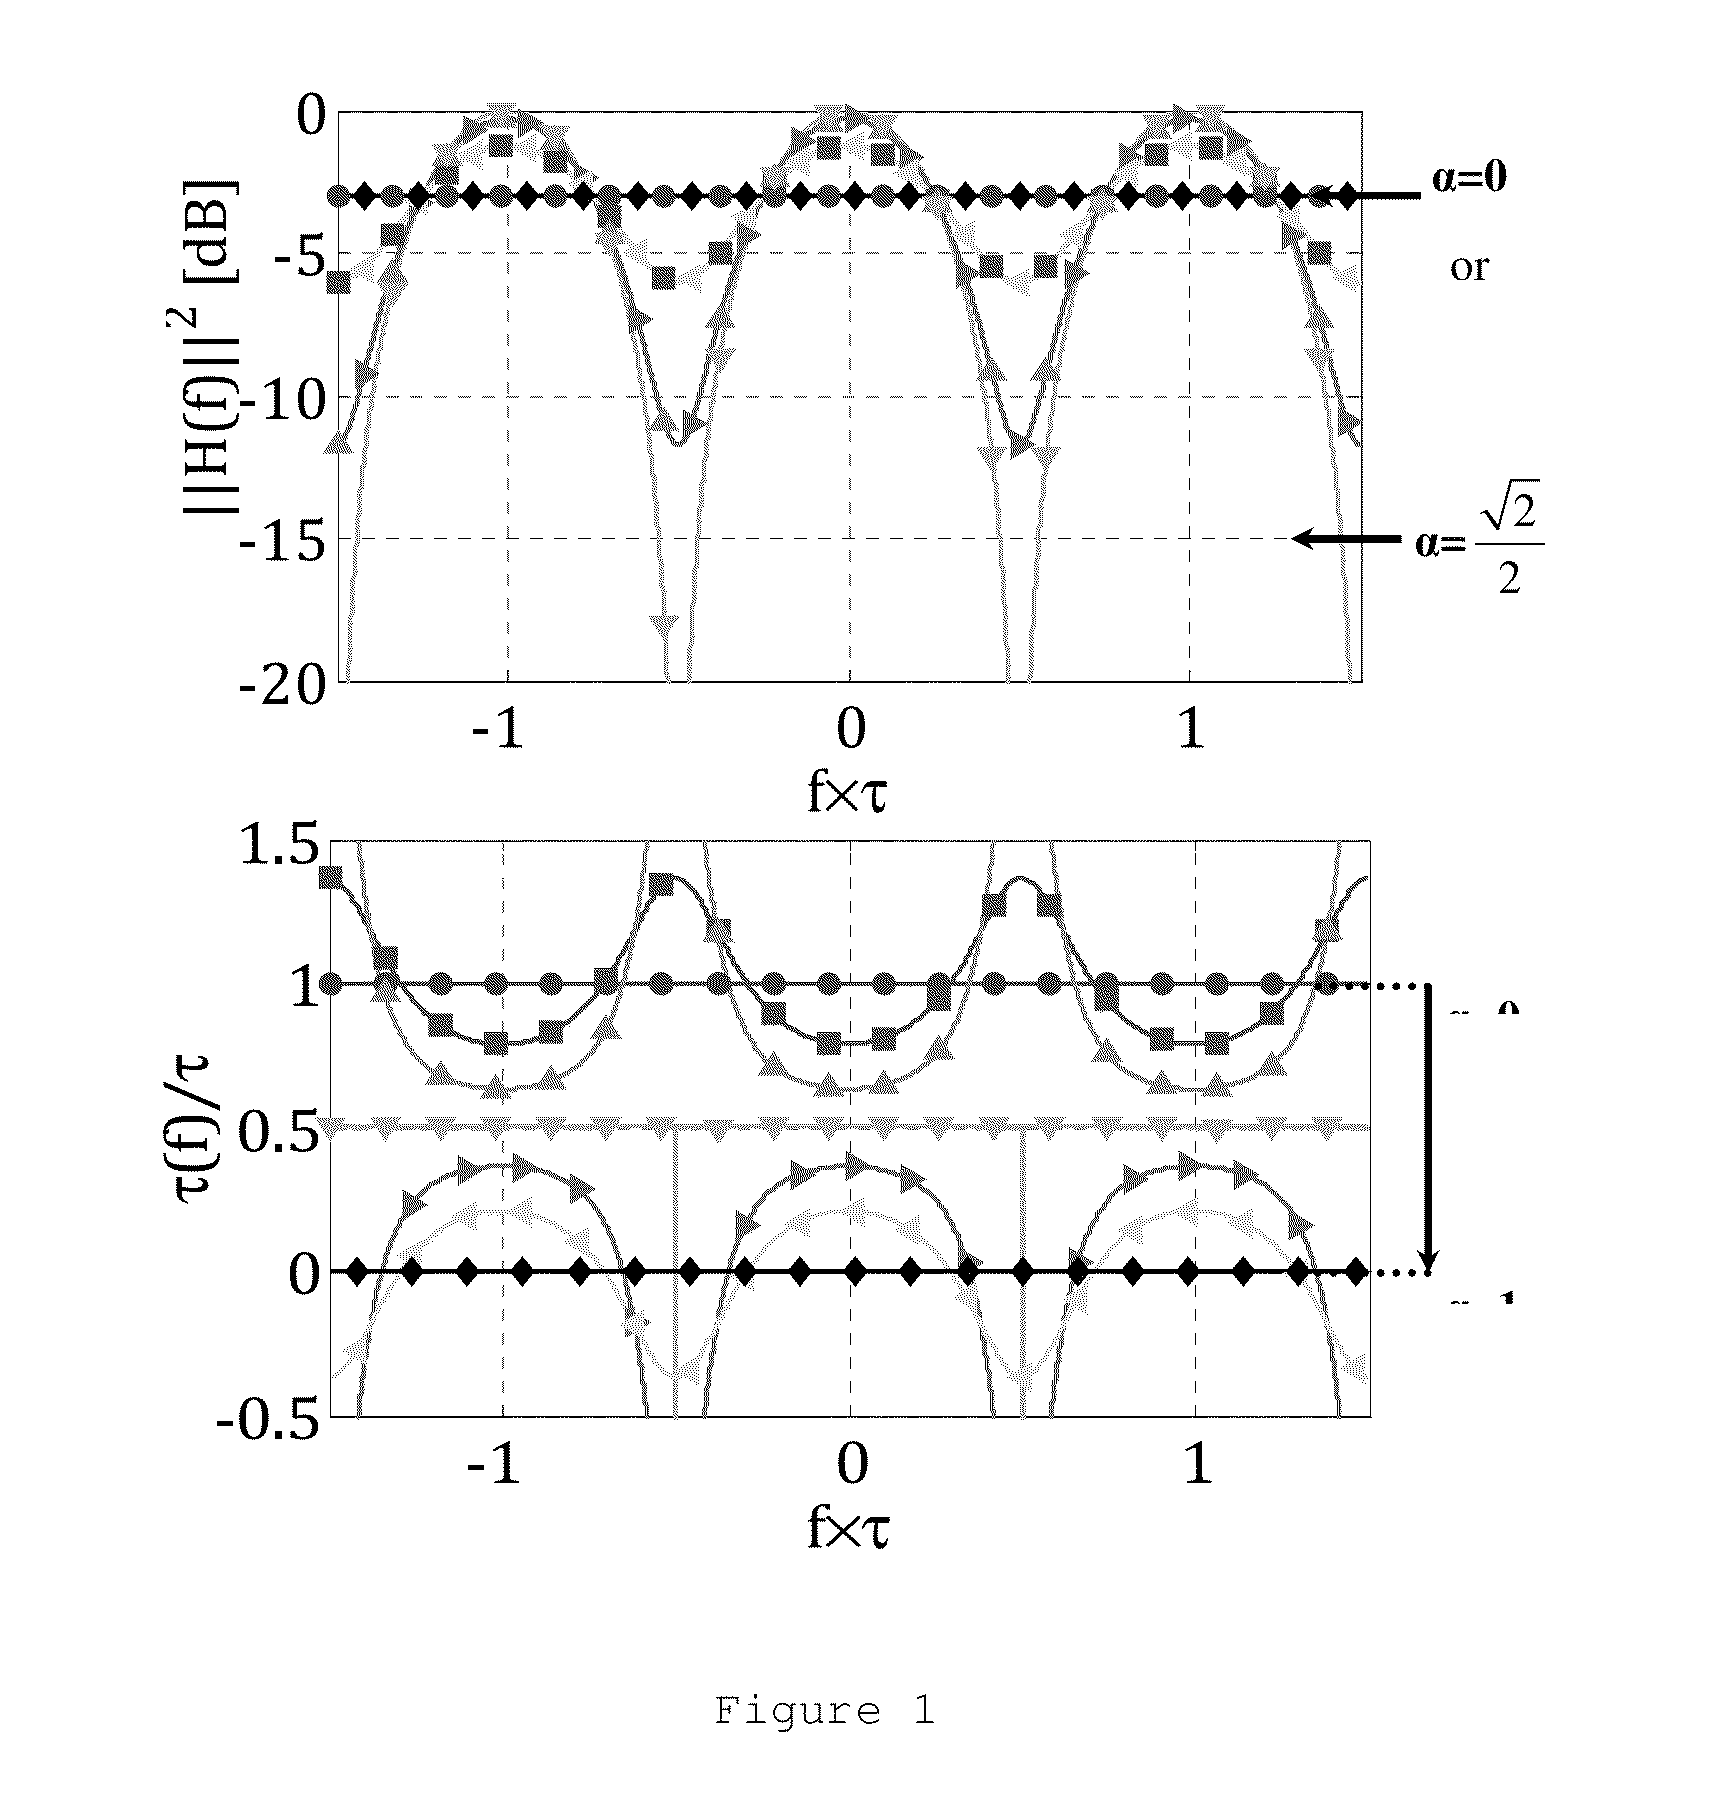 Photonic system and method for tunable beamforming of the electric field radiated by a phased array antenna